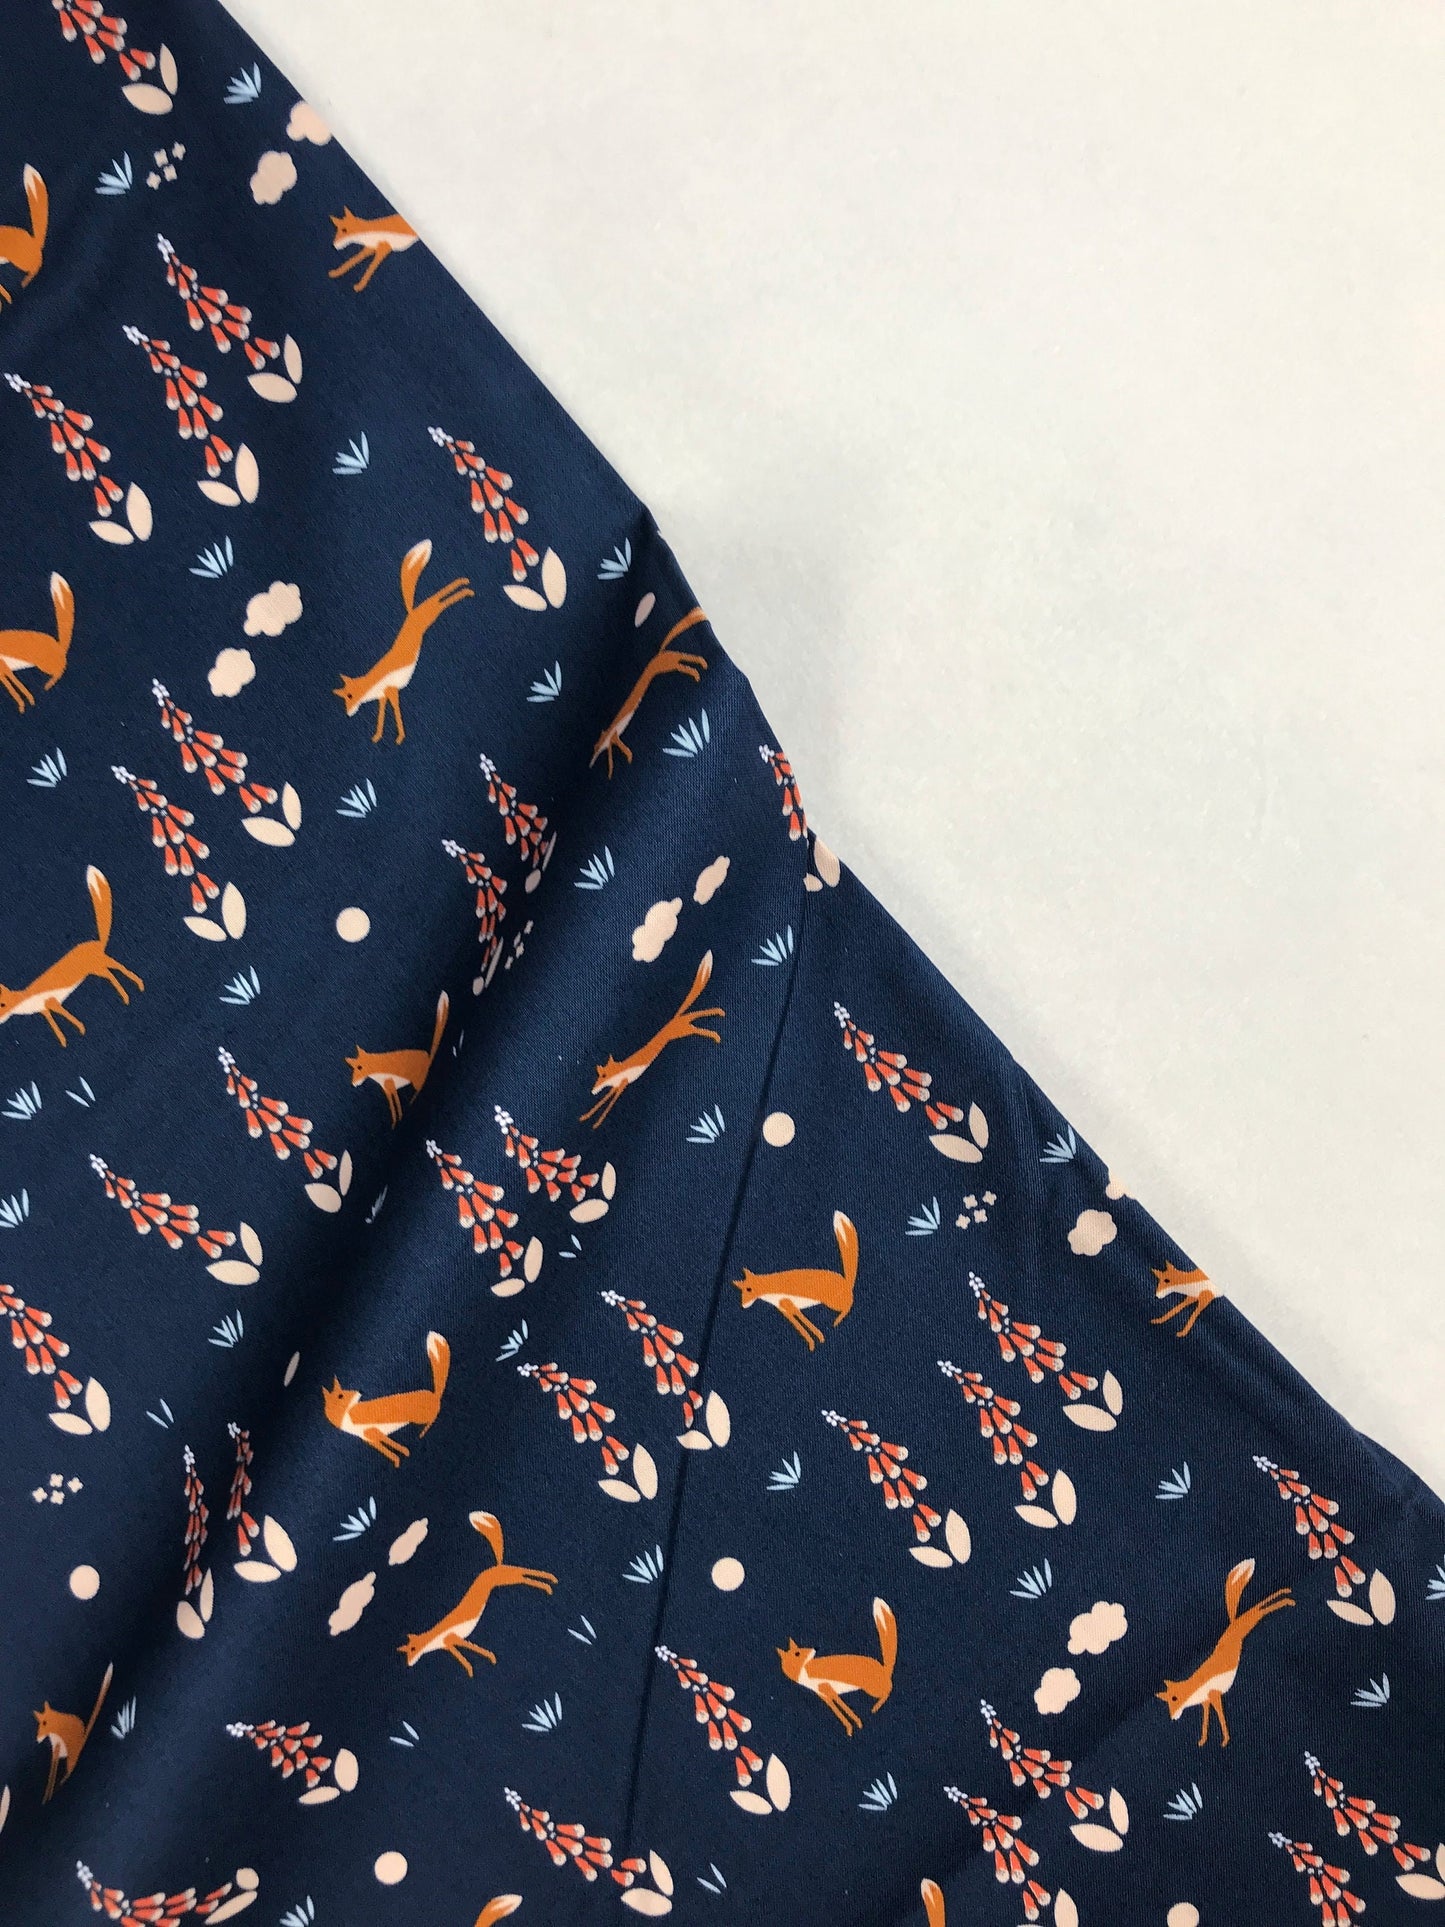 Foxes Navy Meander Aneela Hoey Moda Quilters Cotton Fabric Fetish